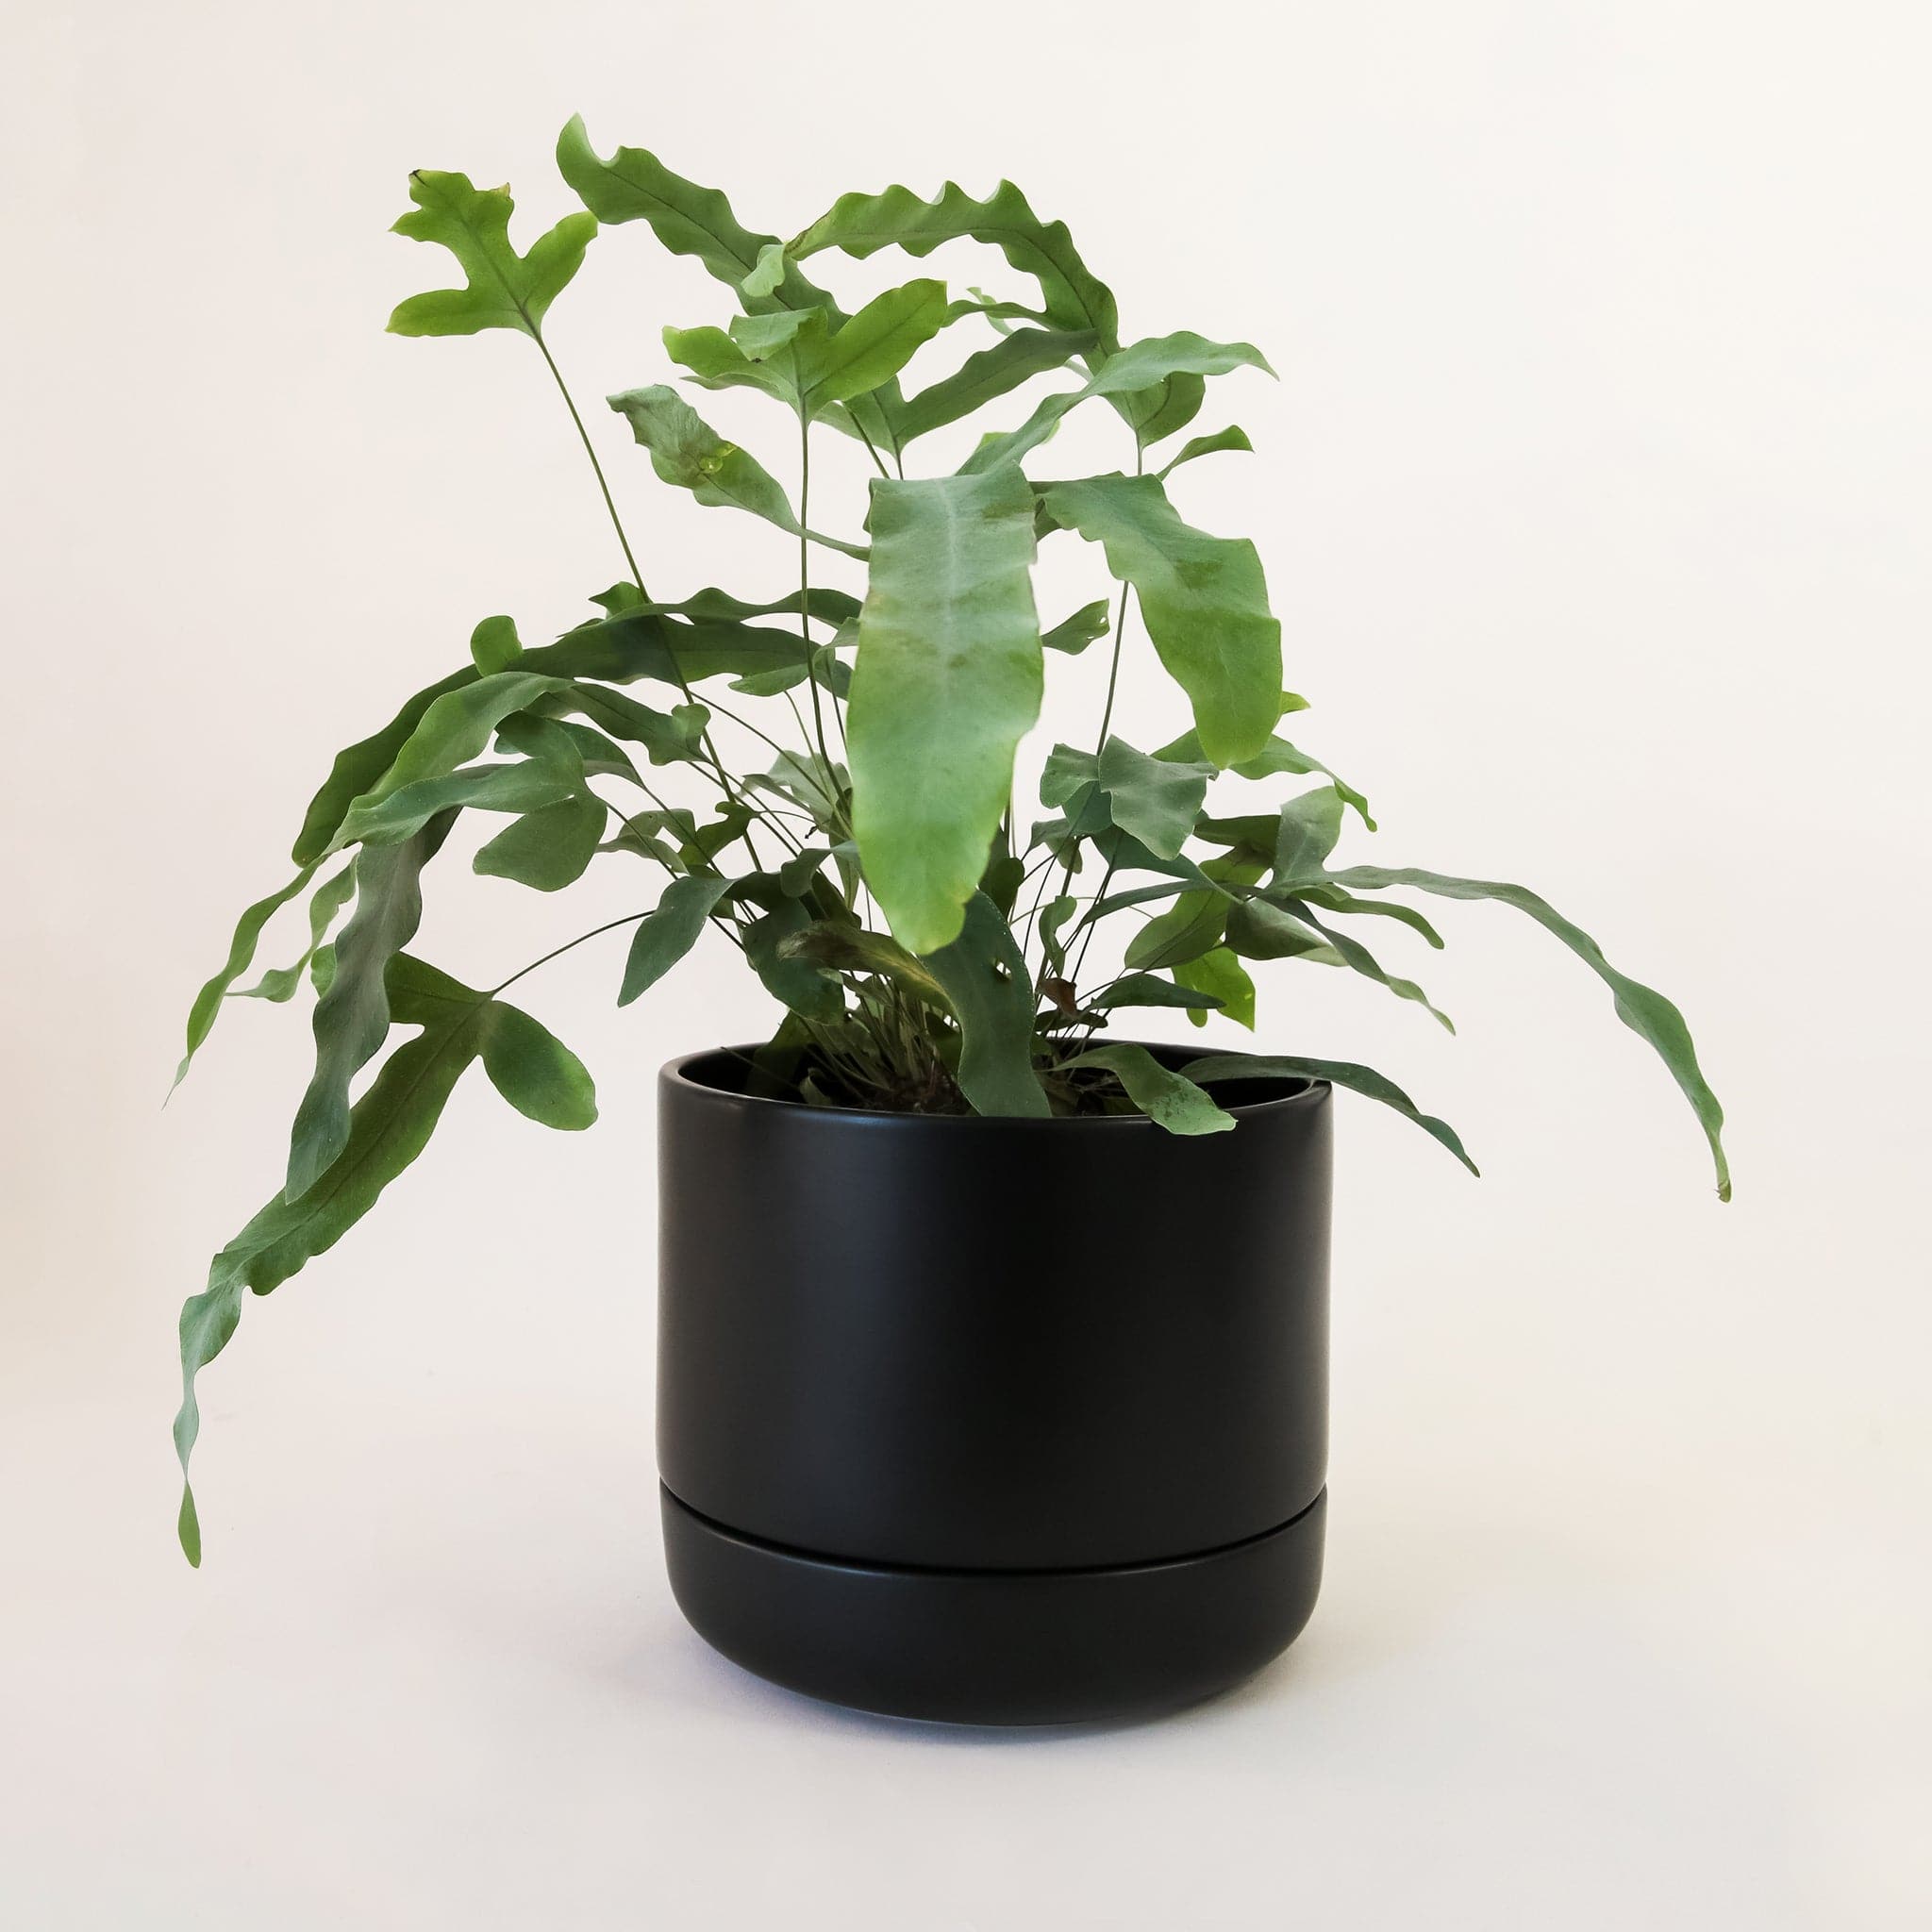 Franklin Matte black self watering planter with plant